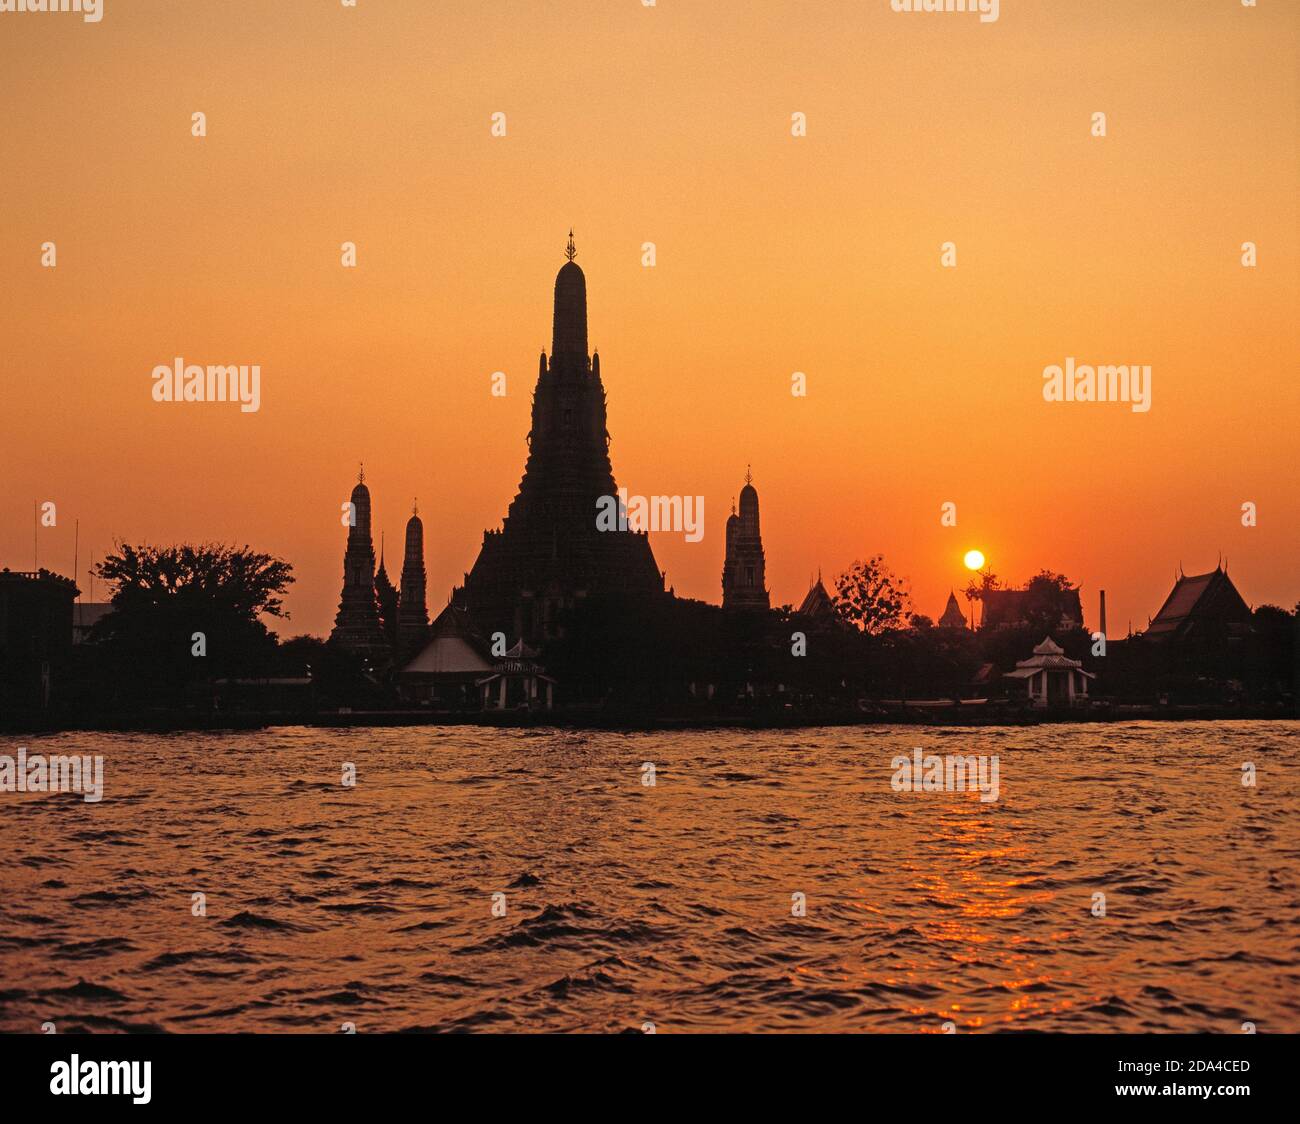 Thailand.  Bangkok. Wat Arun. View of temple buildings from across the Chao Phraya river at sunset. Stock Photo